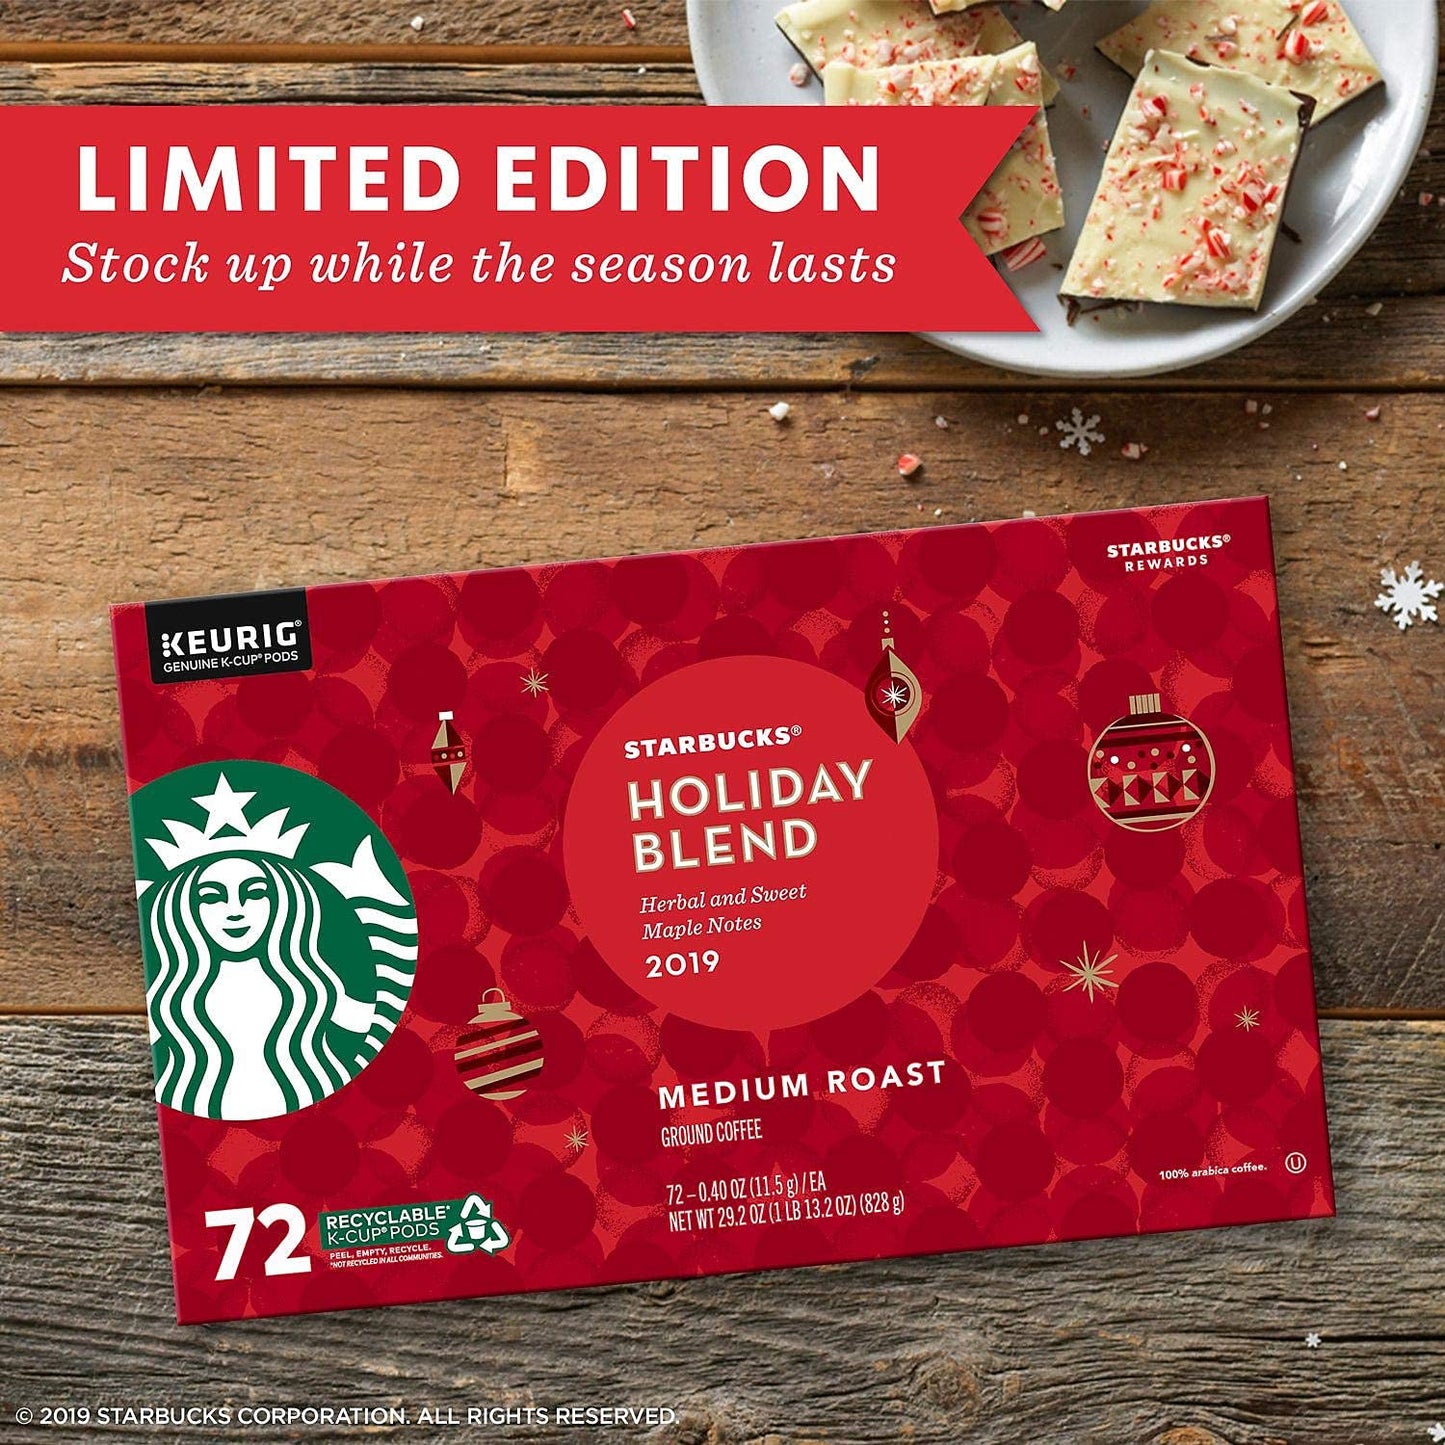 Starbucks Coffee Holiday Blend K Cup Pods, 29.2 Oz, 72 Count